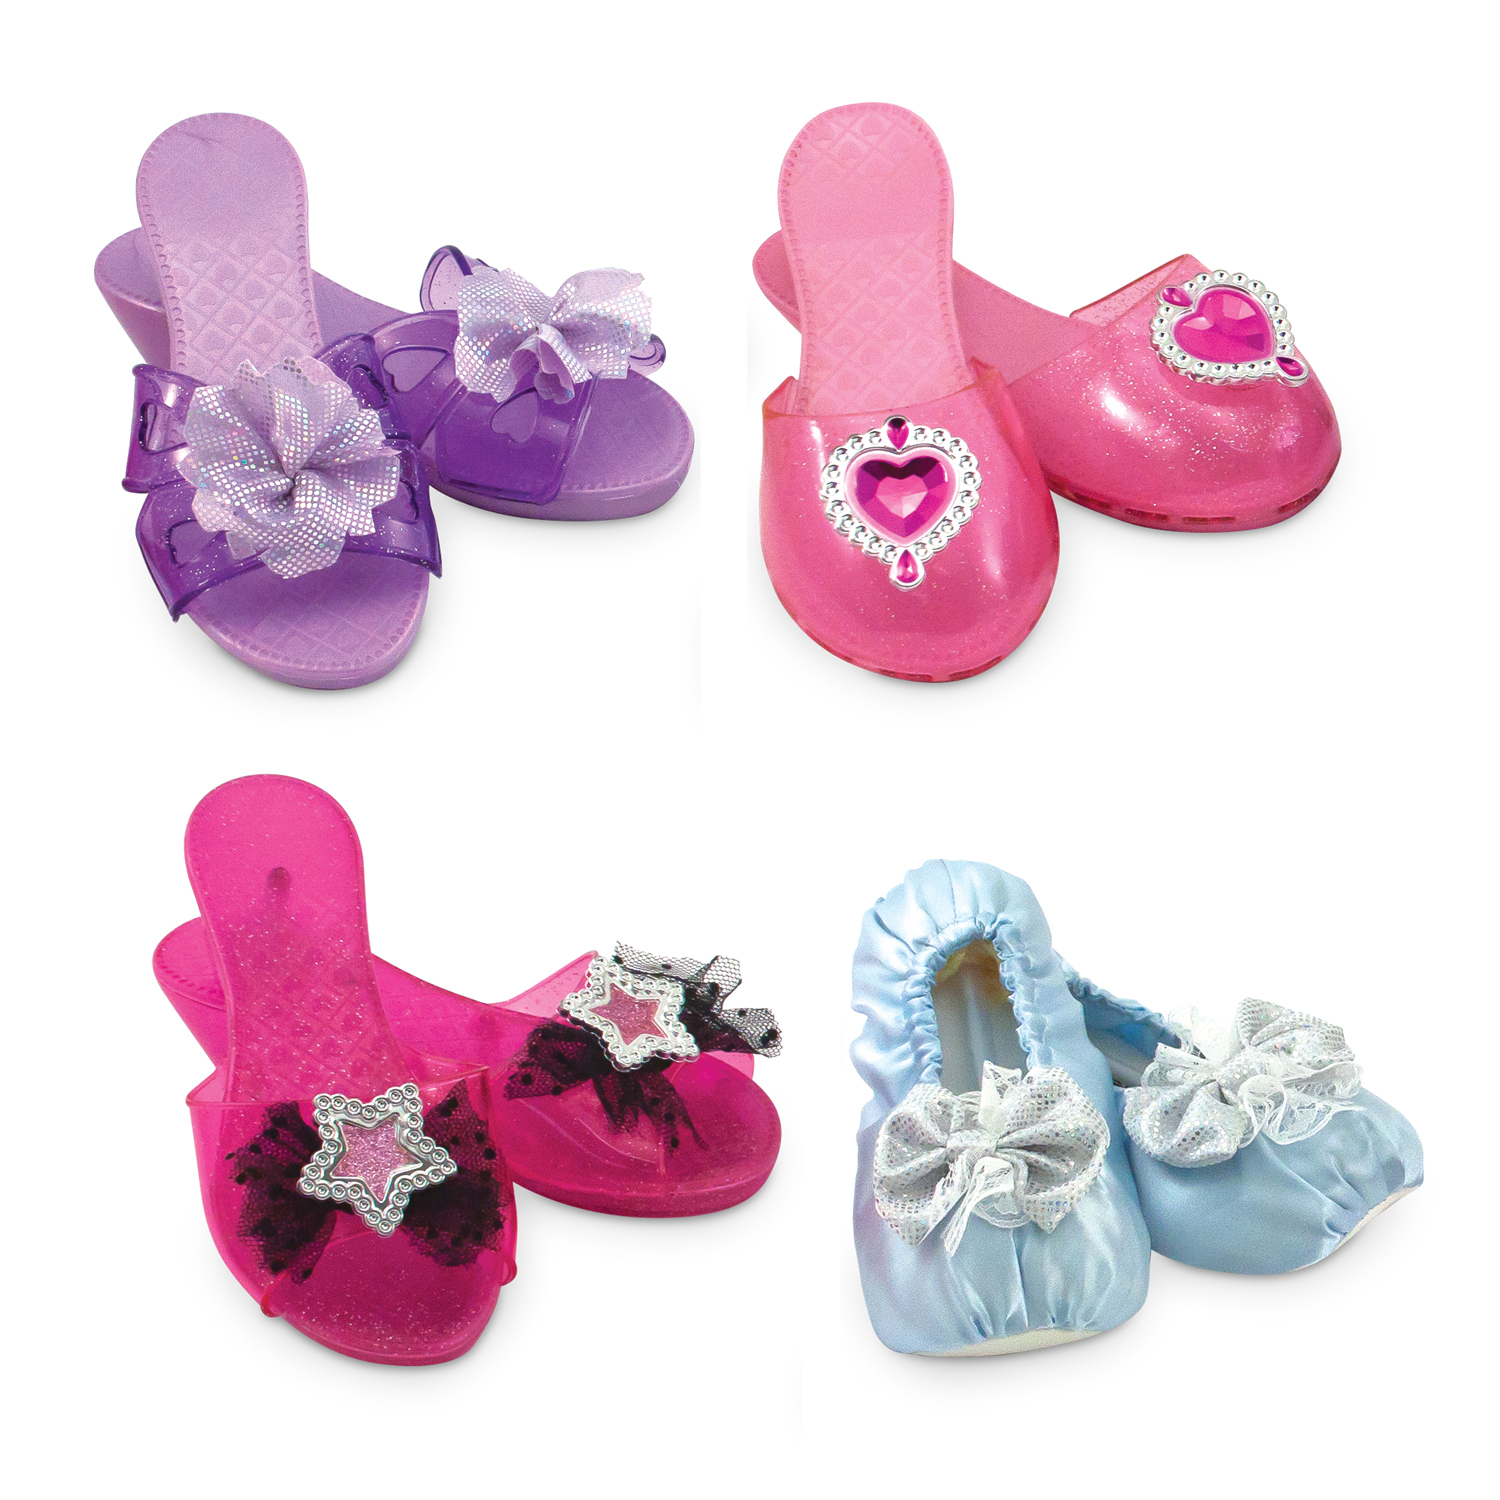 Melissa & Doug Dress-Up Shoes - Role Play Collection